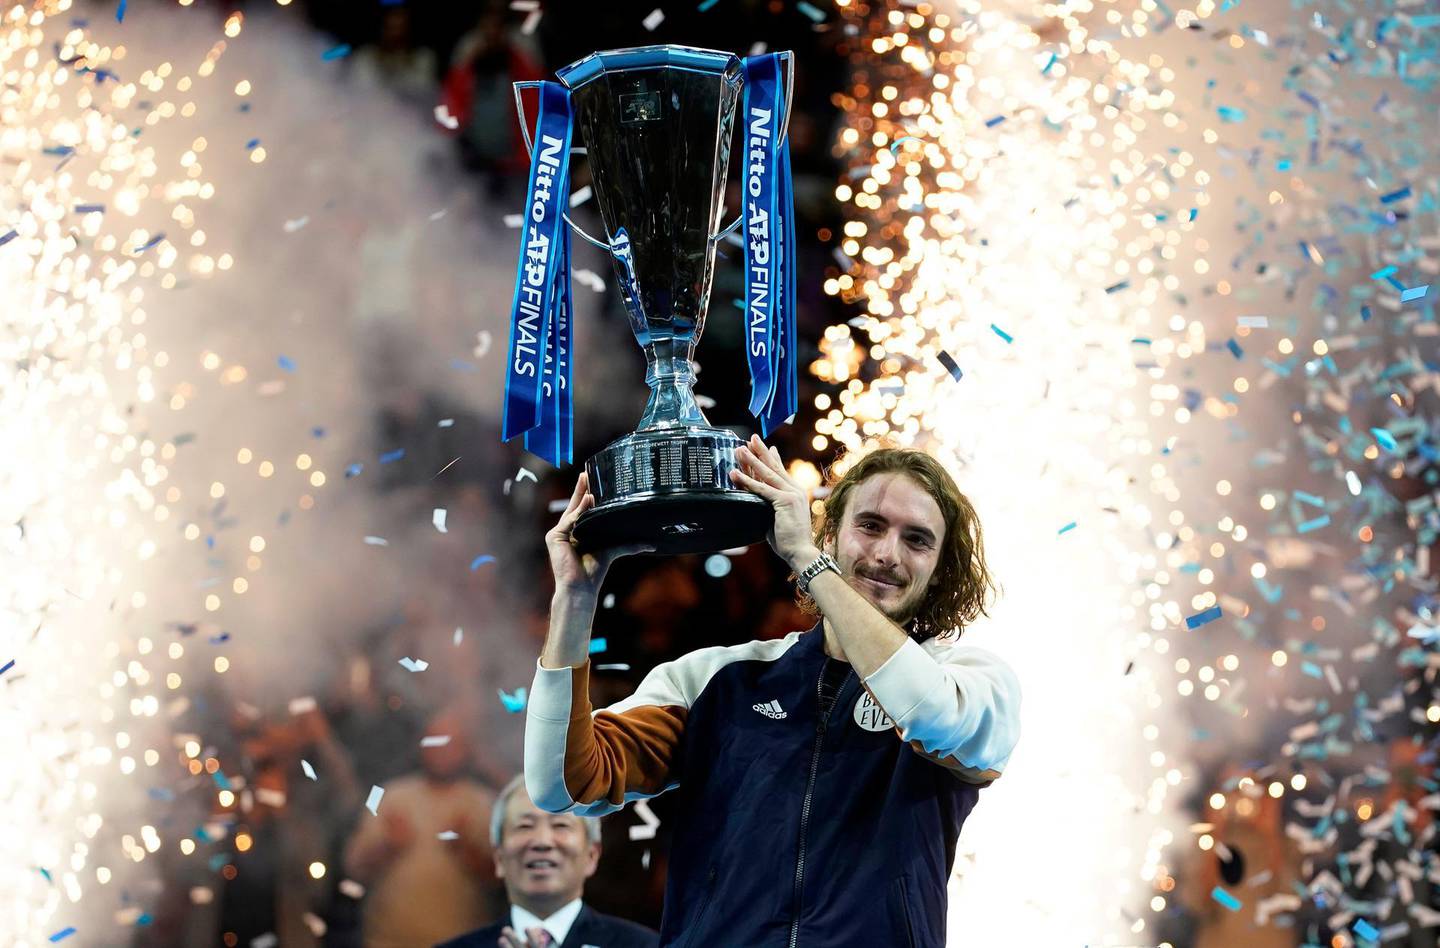 epa08004791 Stefanos Tsitsipas of Greece lifts his trophy after winning the final match against Dominic Thiem of Austria at the ATP World Tour Finals tennis tournament in London, Britain, 17 November 2019.  EPA/WILL OLIVER